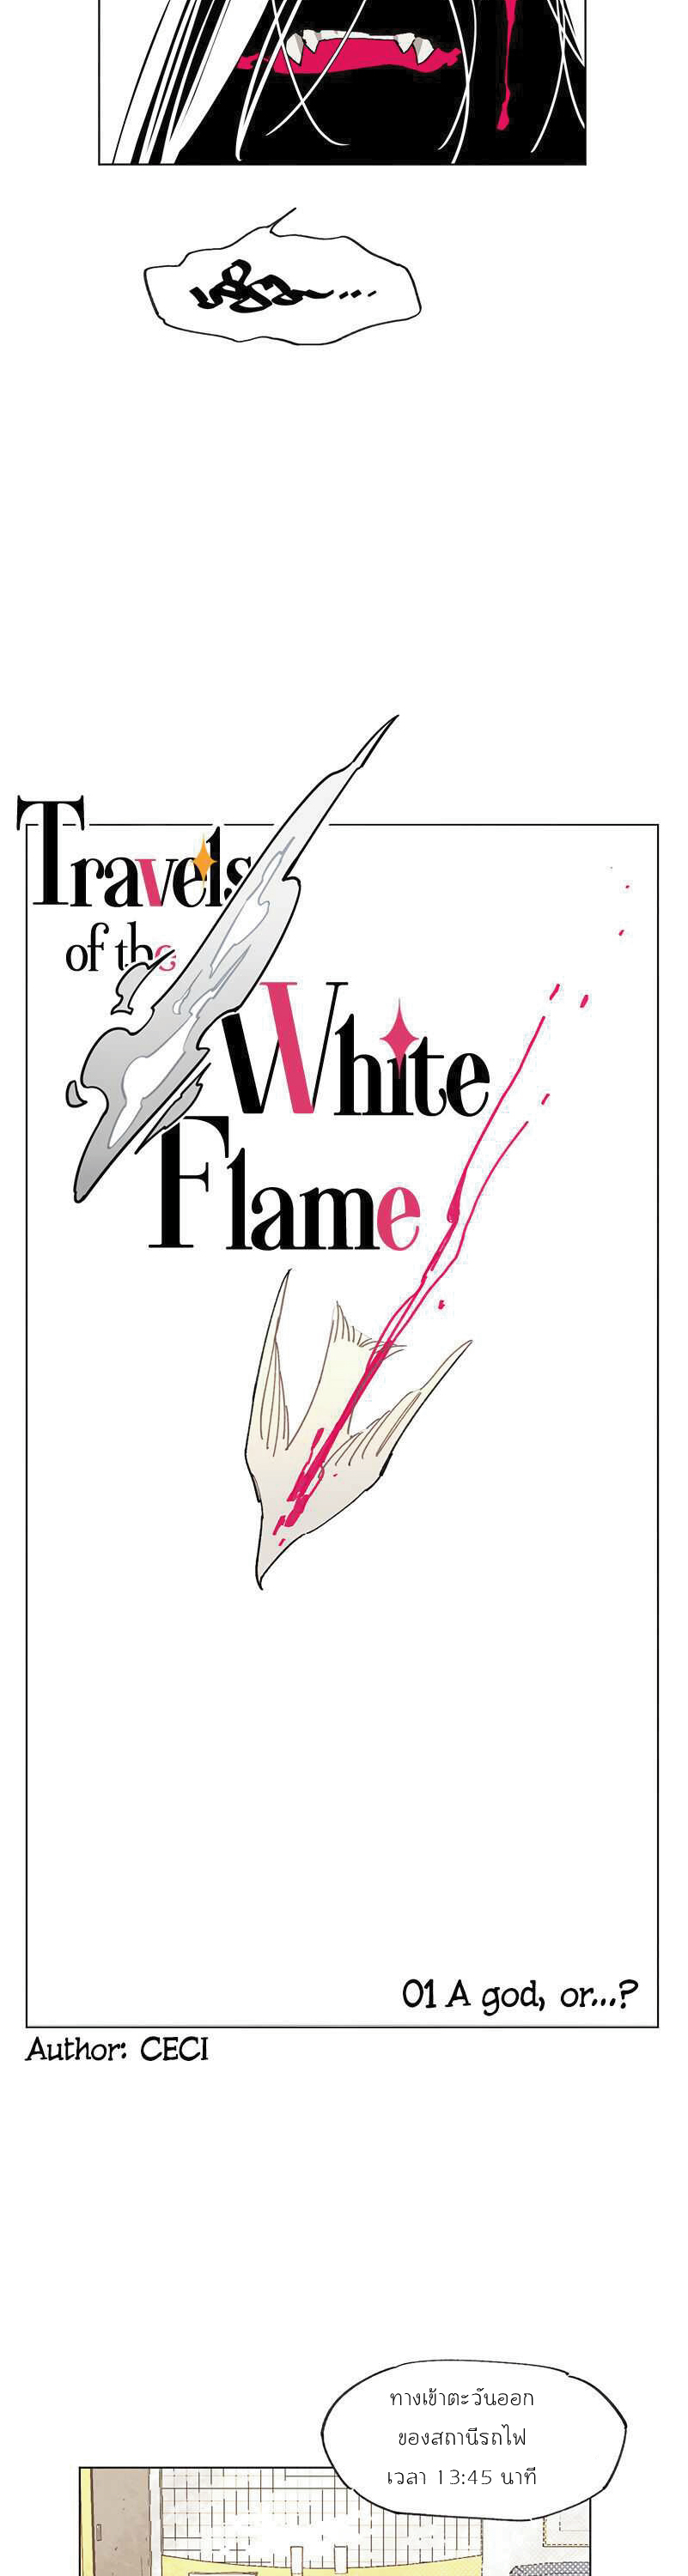 Travels of the White Flame 1 (3)